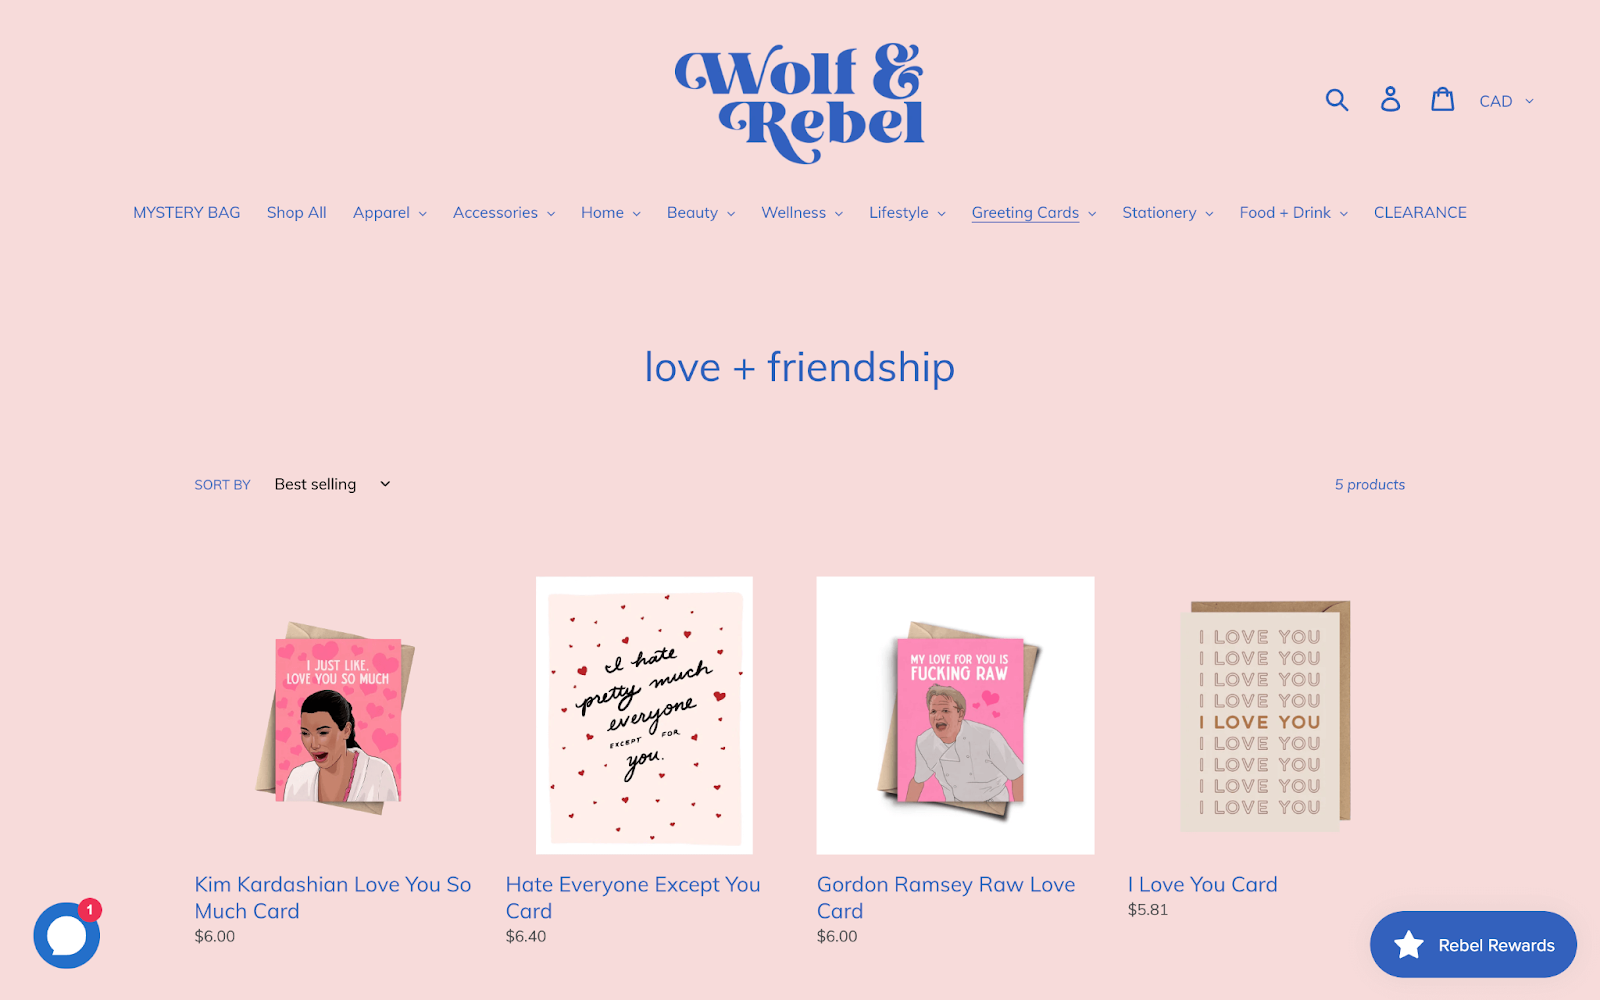 Valentine’s Day Gift Ideas–A screenshot from Wolf and Rebel’s “love + friendship” greeting cards product catalog page. There are 4 greeting cards visible that have cartoons of Kim Kardashian, Gordon Ramsey, and various messages on them. 